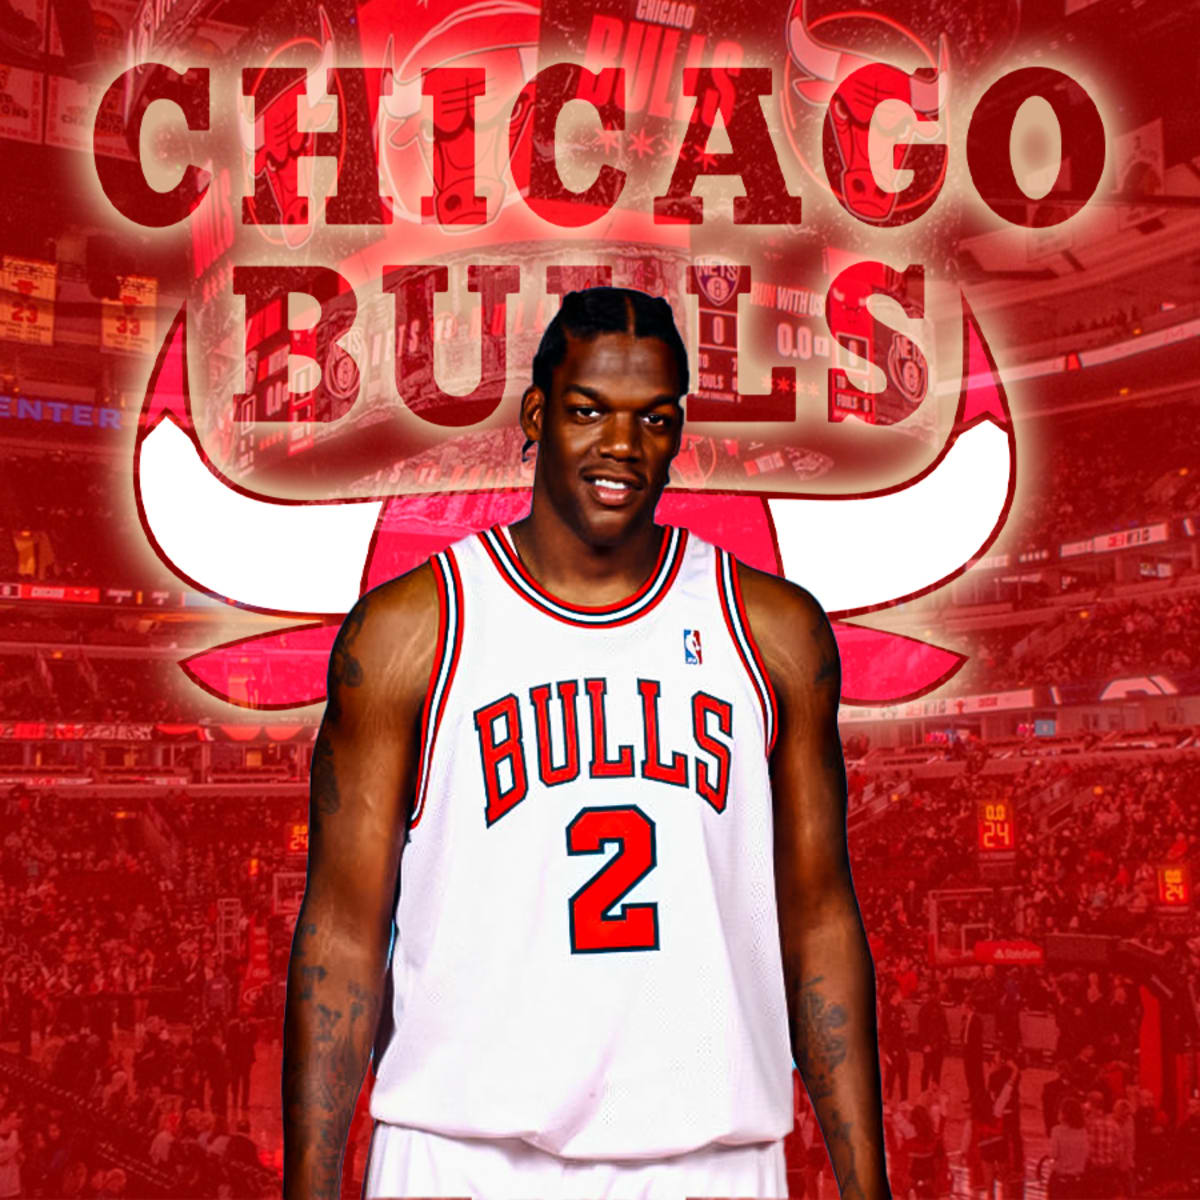 Catching up with Eddy Curry: I had a heck of a time (in Chicago